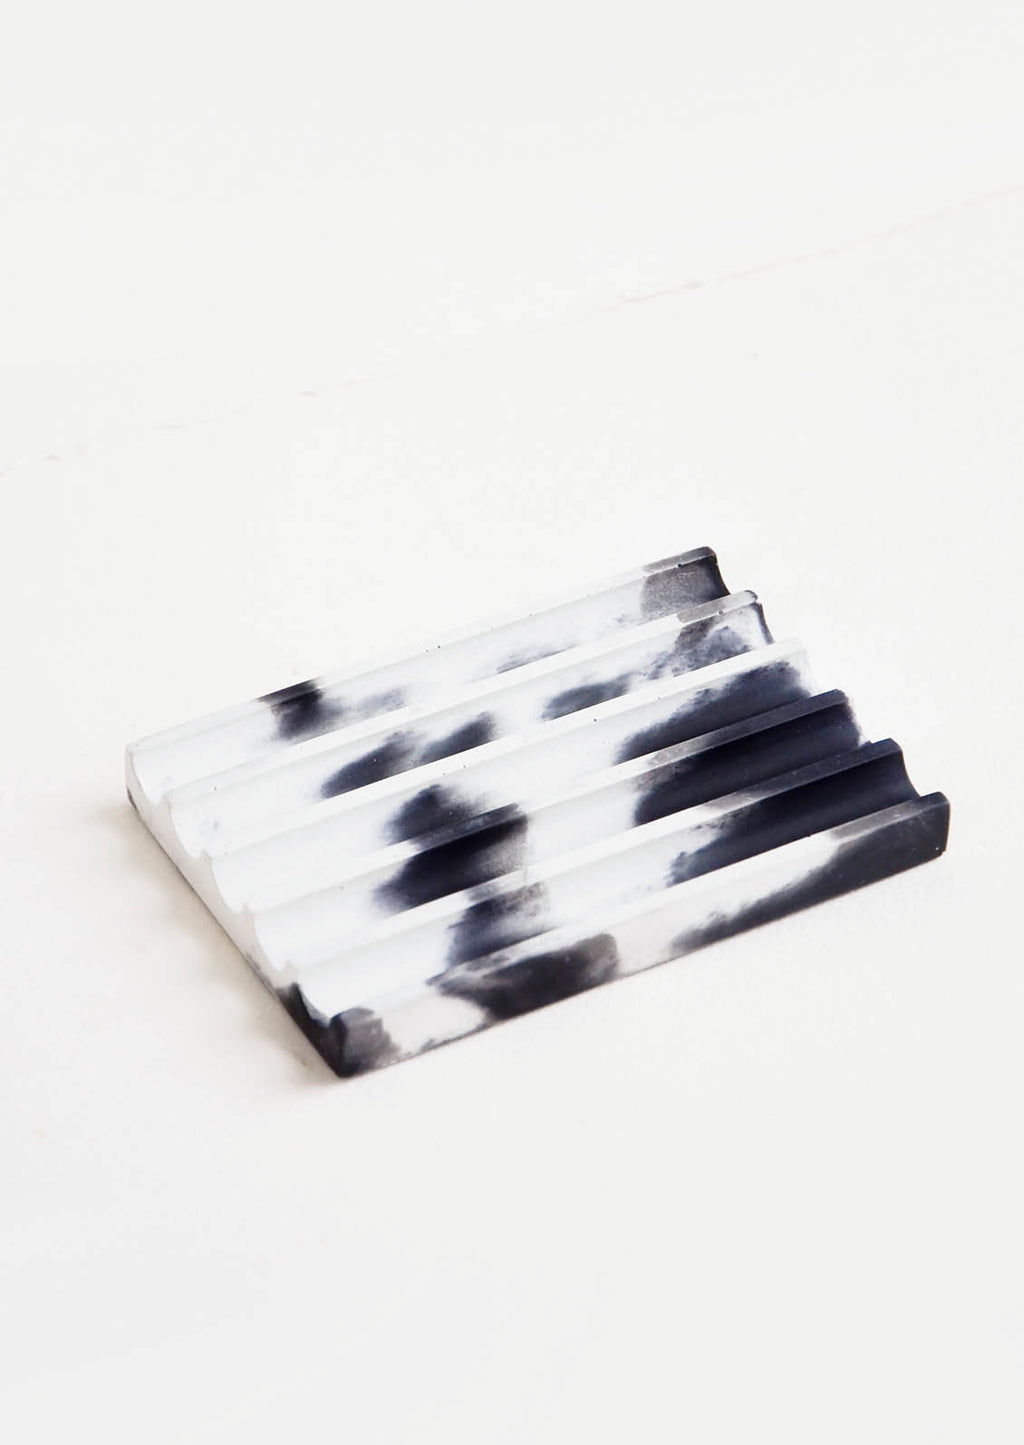 Black / White: A marbled black and white smooth concrete soap dish with troughs and ridges.